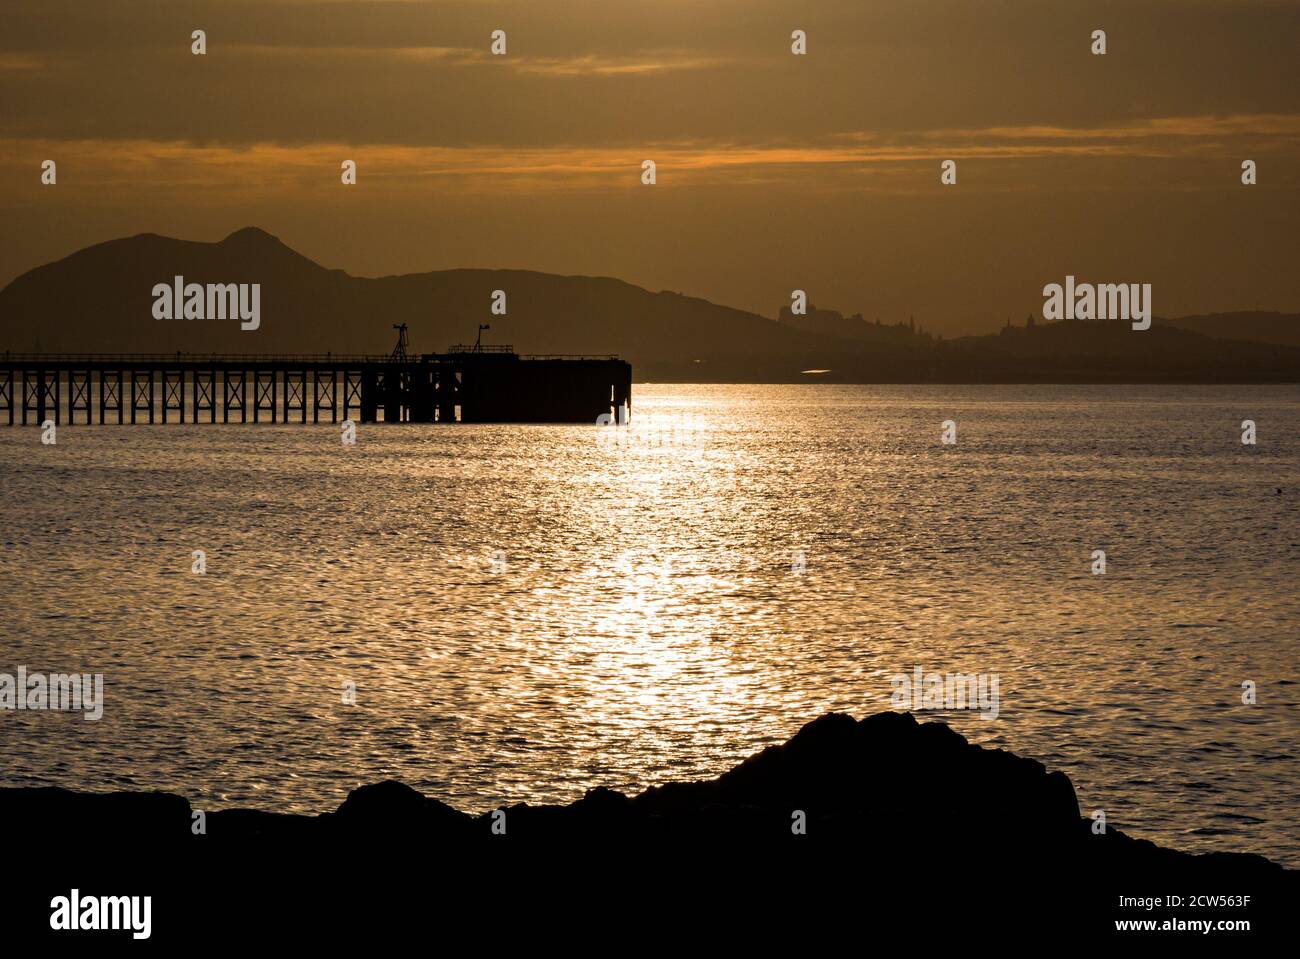 East Lothian, Scotland, United Kingdom, 27th September 2020. UK Weather: sunset over the Firth of Forth looking towards the distinctive Edinburgh skyline with a silhouette of Cockenzie disused pier Stock Photo